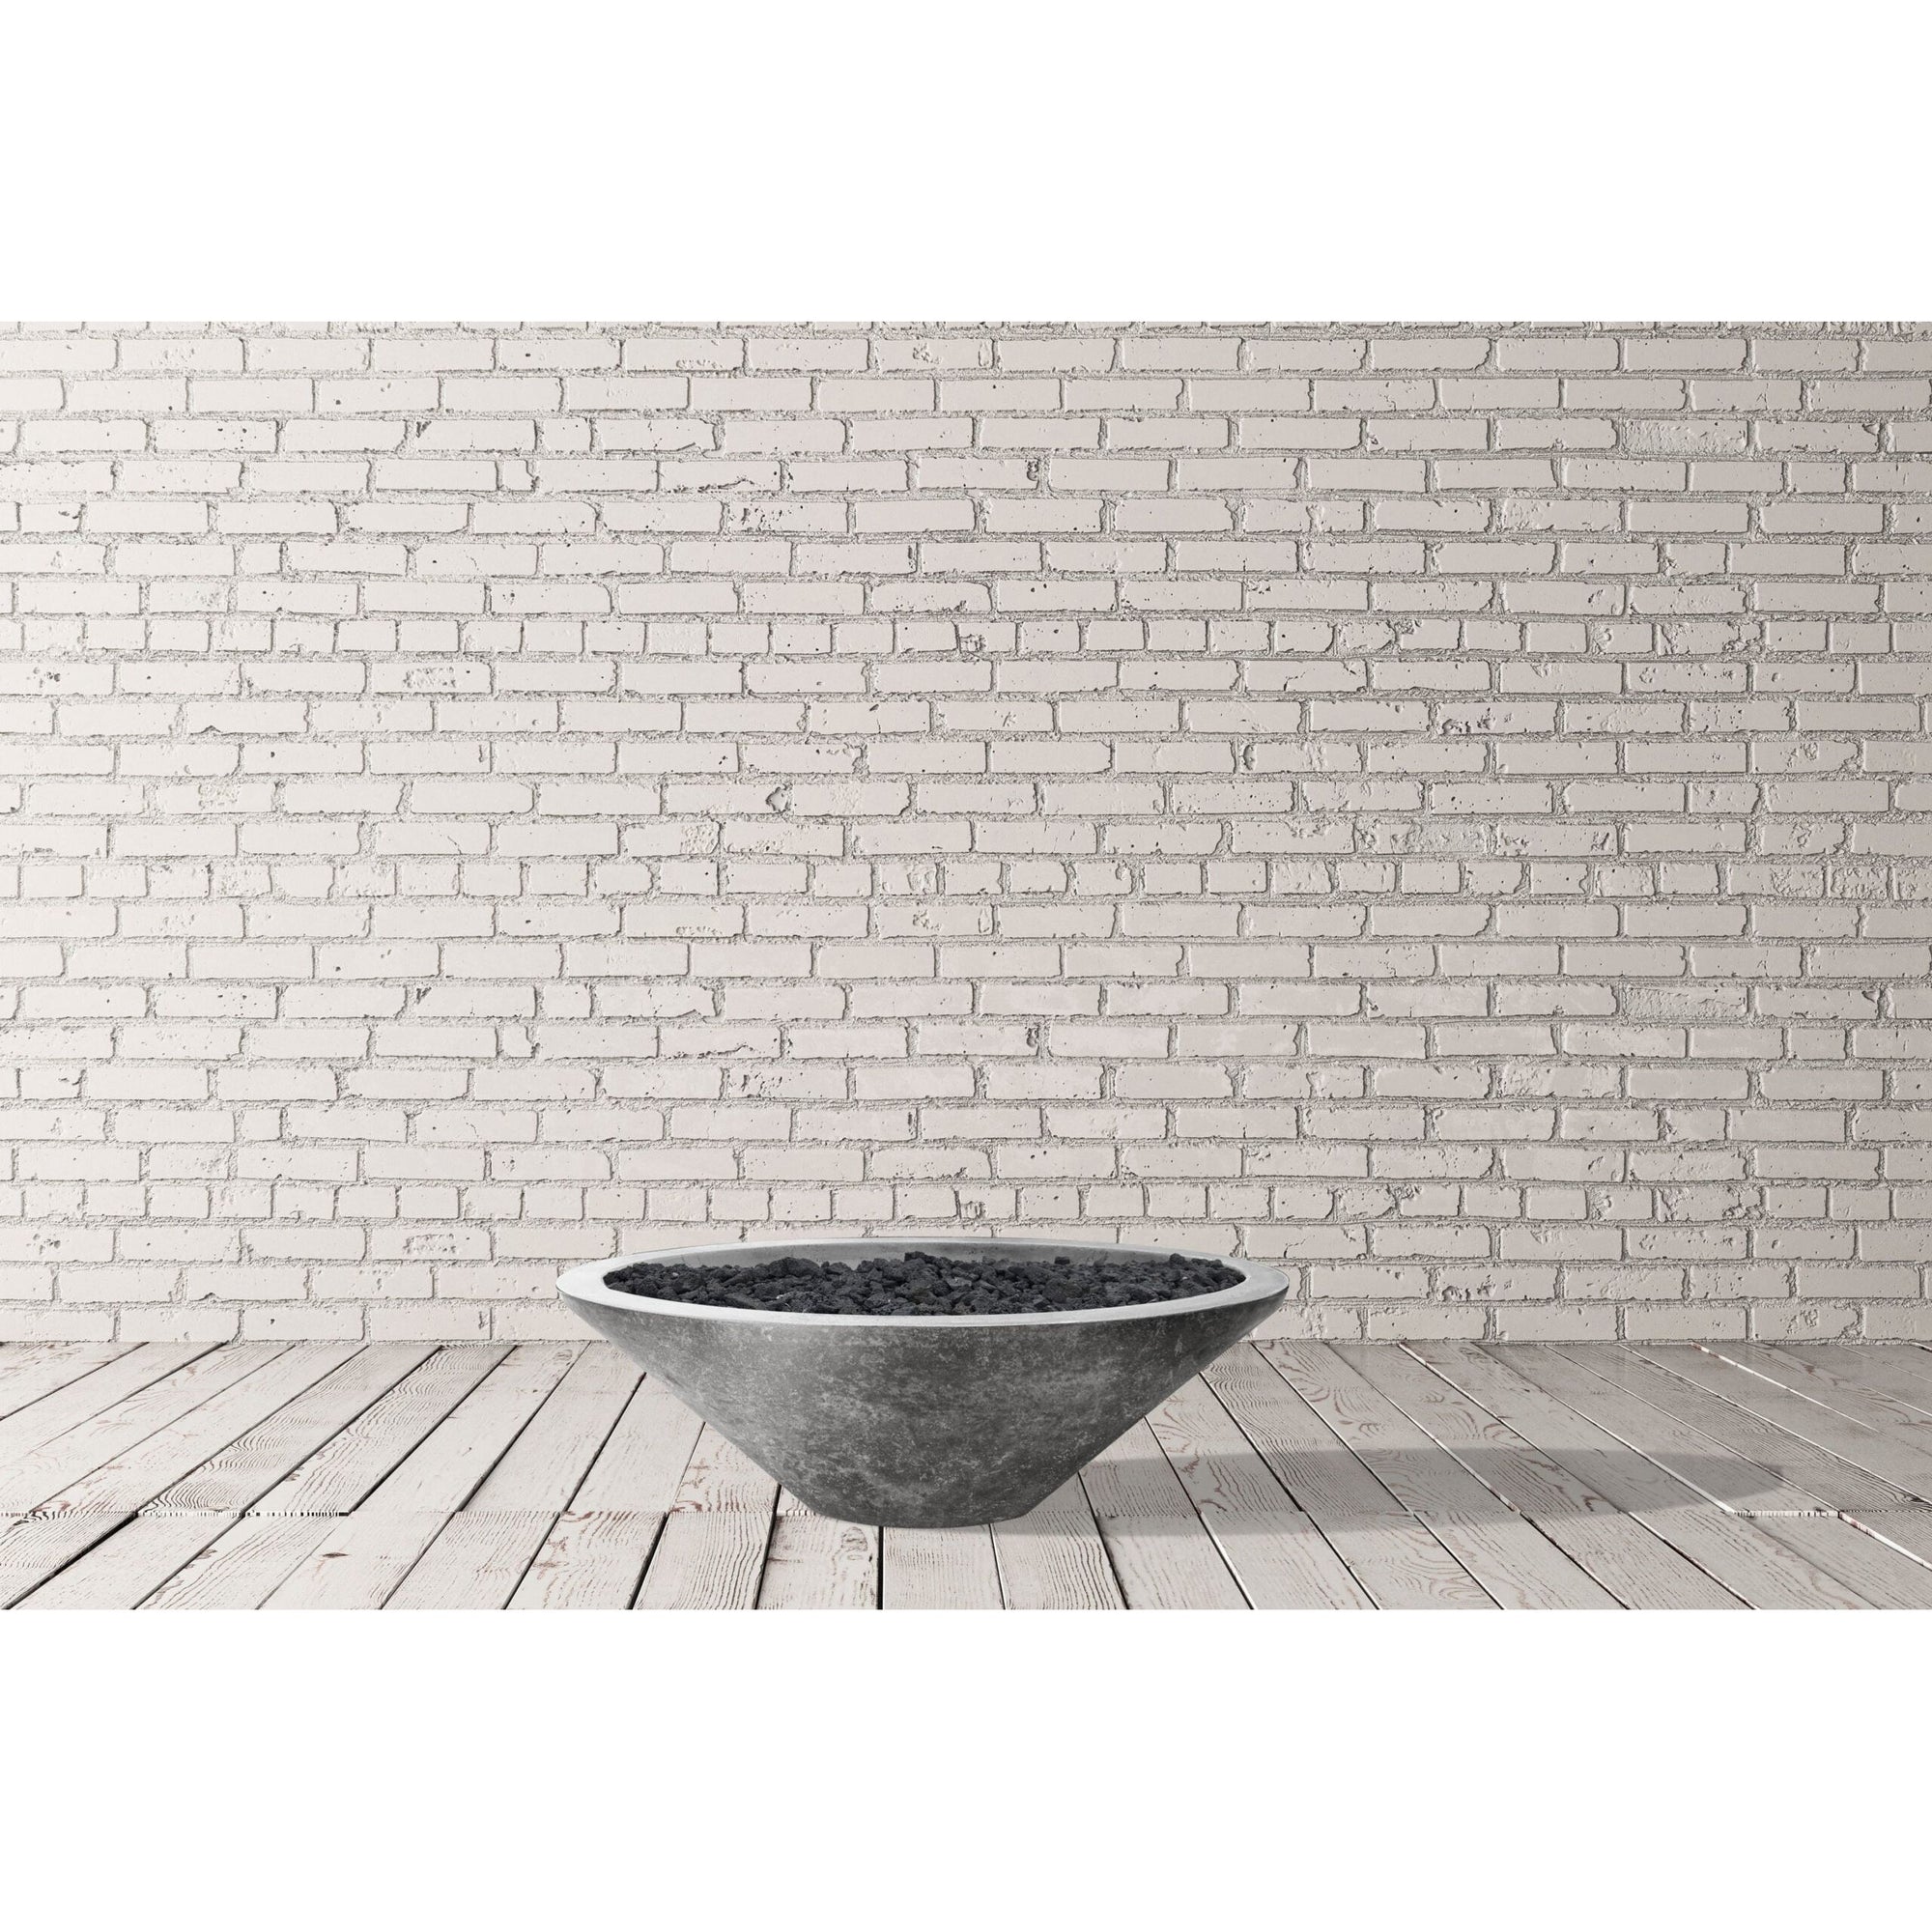 Embarcadero Pedestal Fire Bowl in GFRC Concrete by Prism Hardscapes -  Majestic Fountains